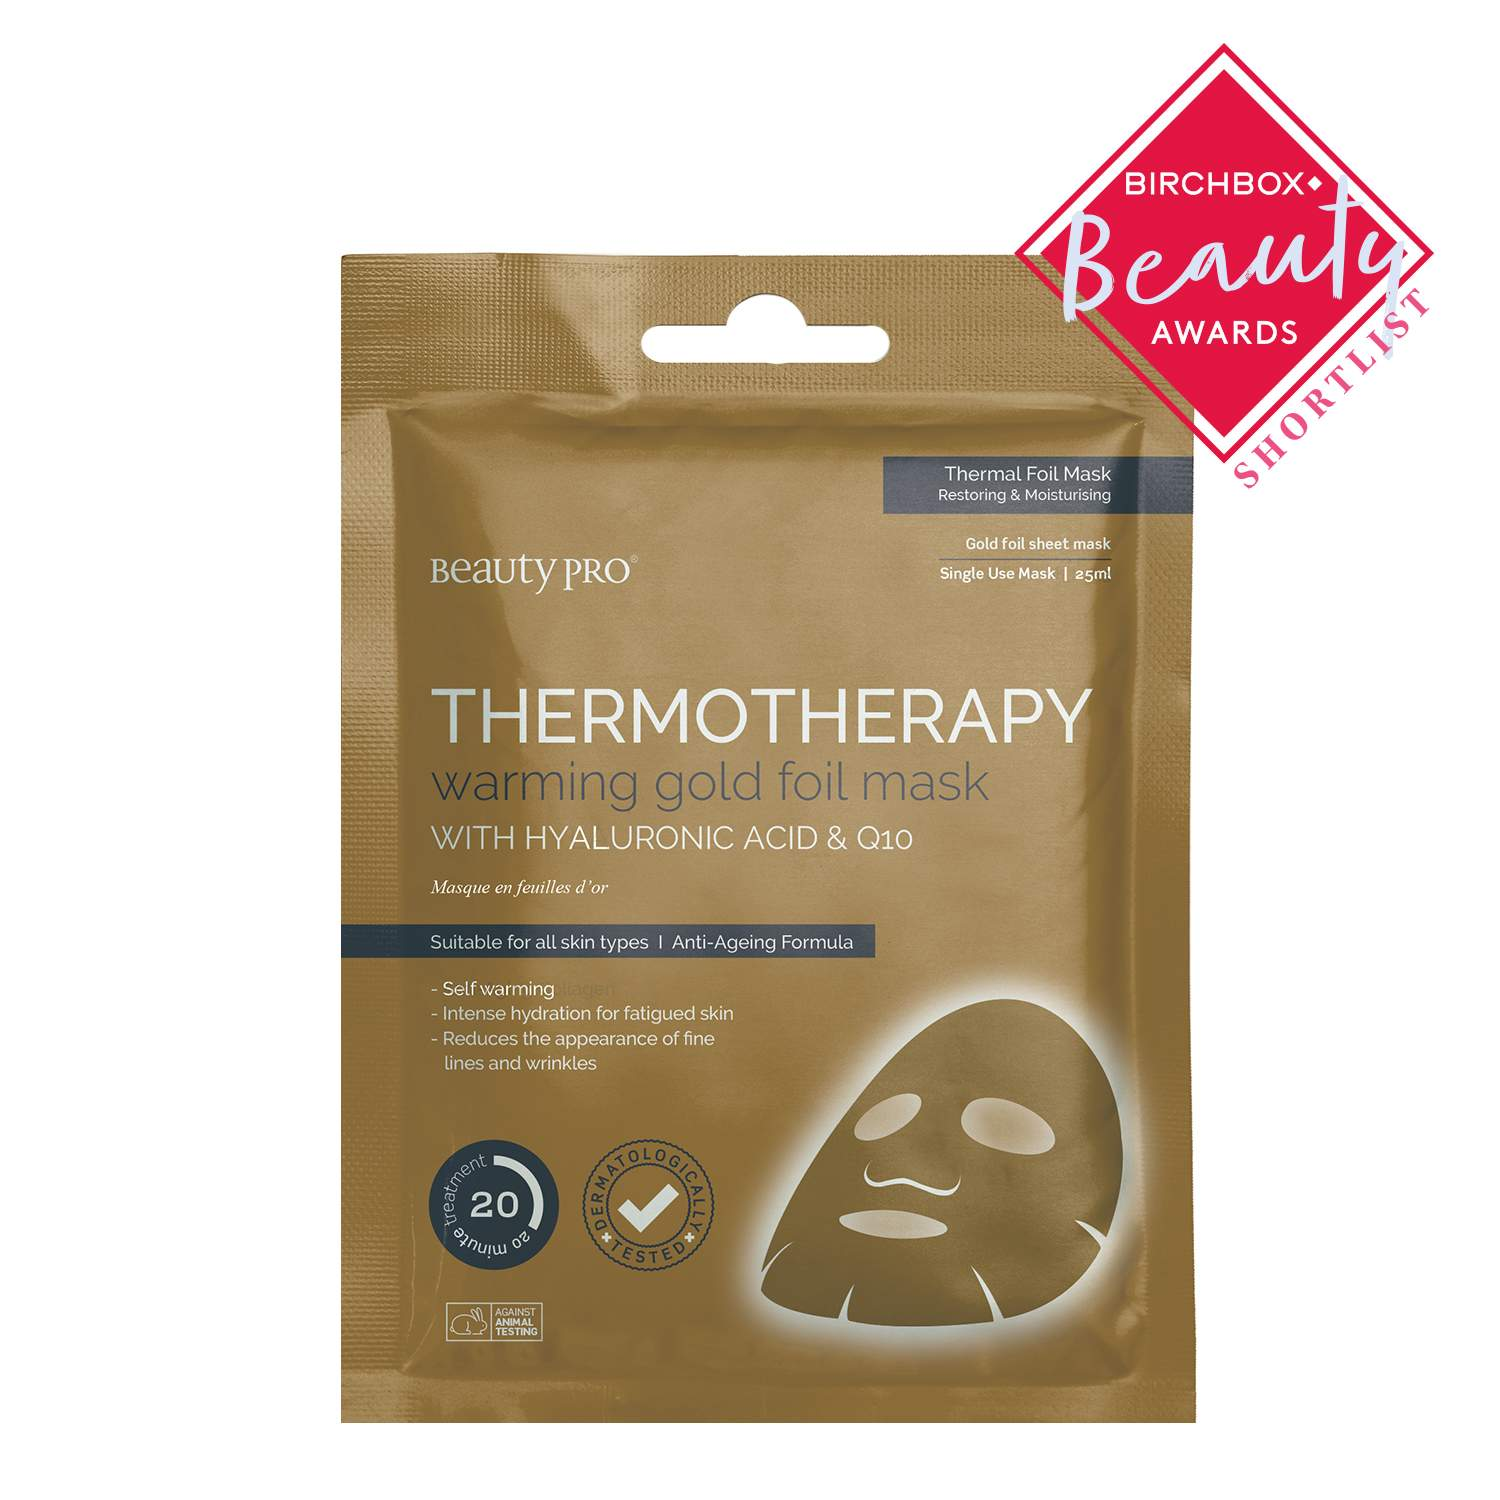 BeautyPro THERMOTHERAPY Warming Gold Foil Mask with Hyaluronic Acid & Q10 BeautyPro THERMOTHERAPY Warming Gold Foil Mask with Hyaluronic Acid & Q10 1